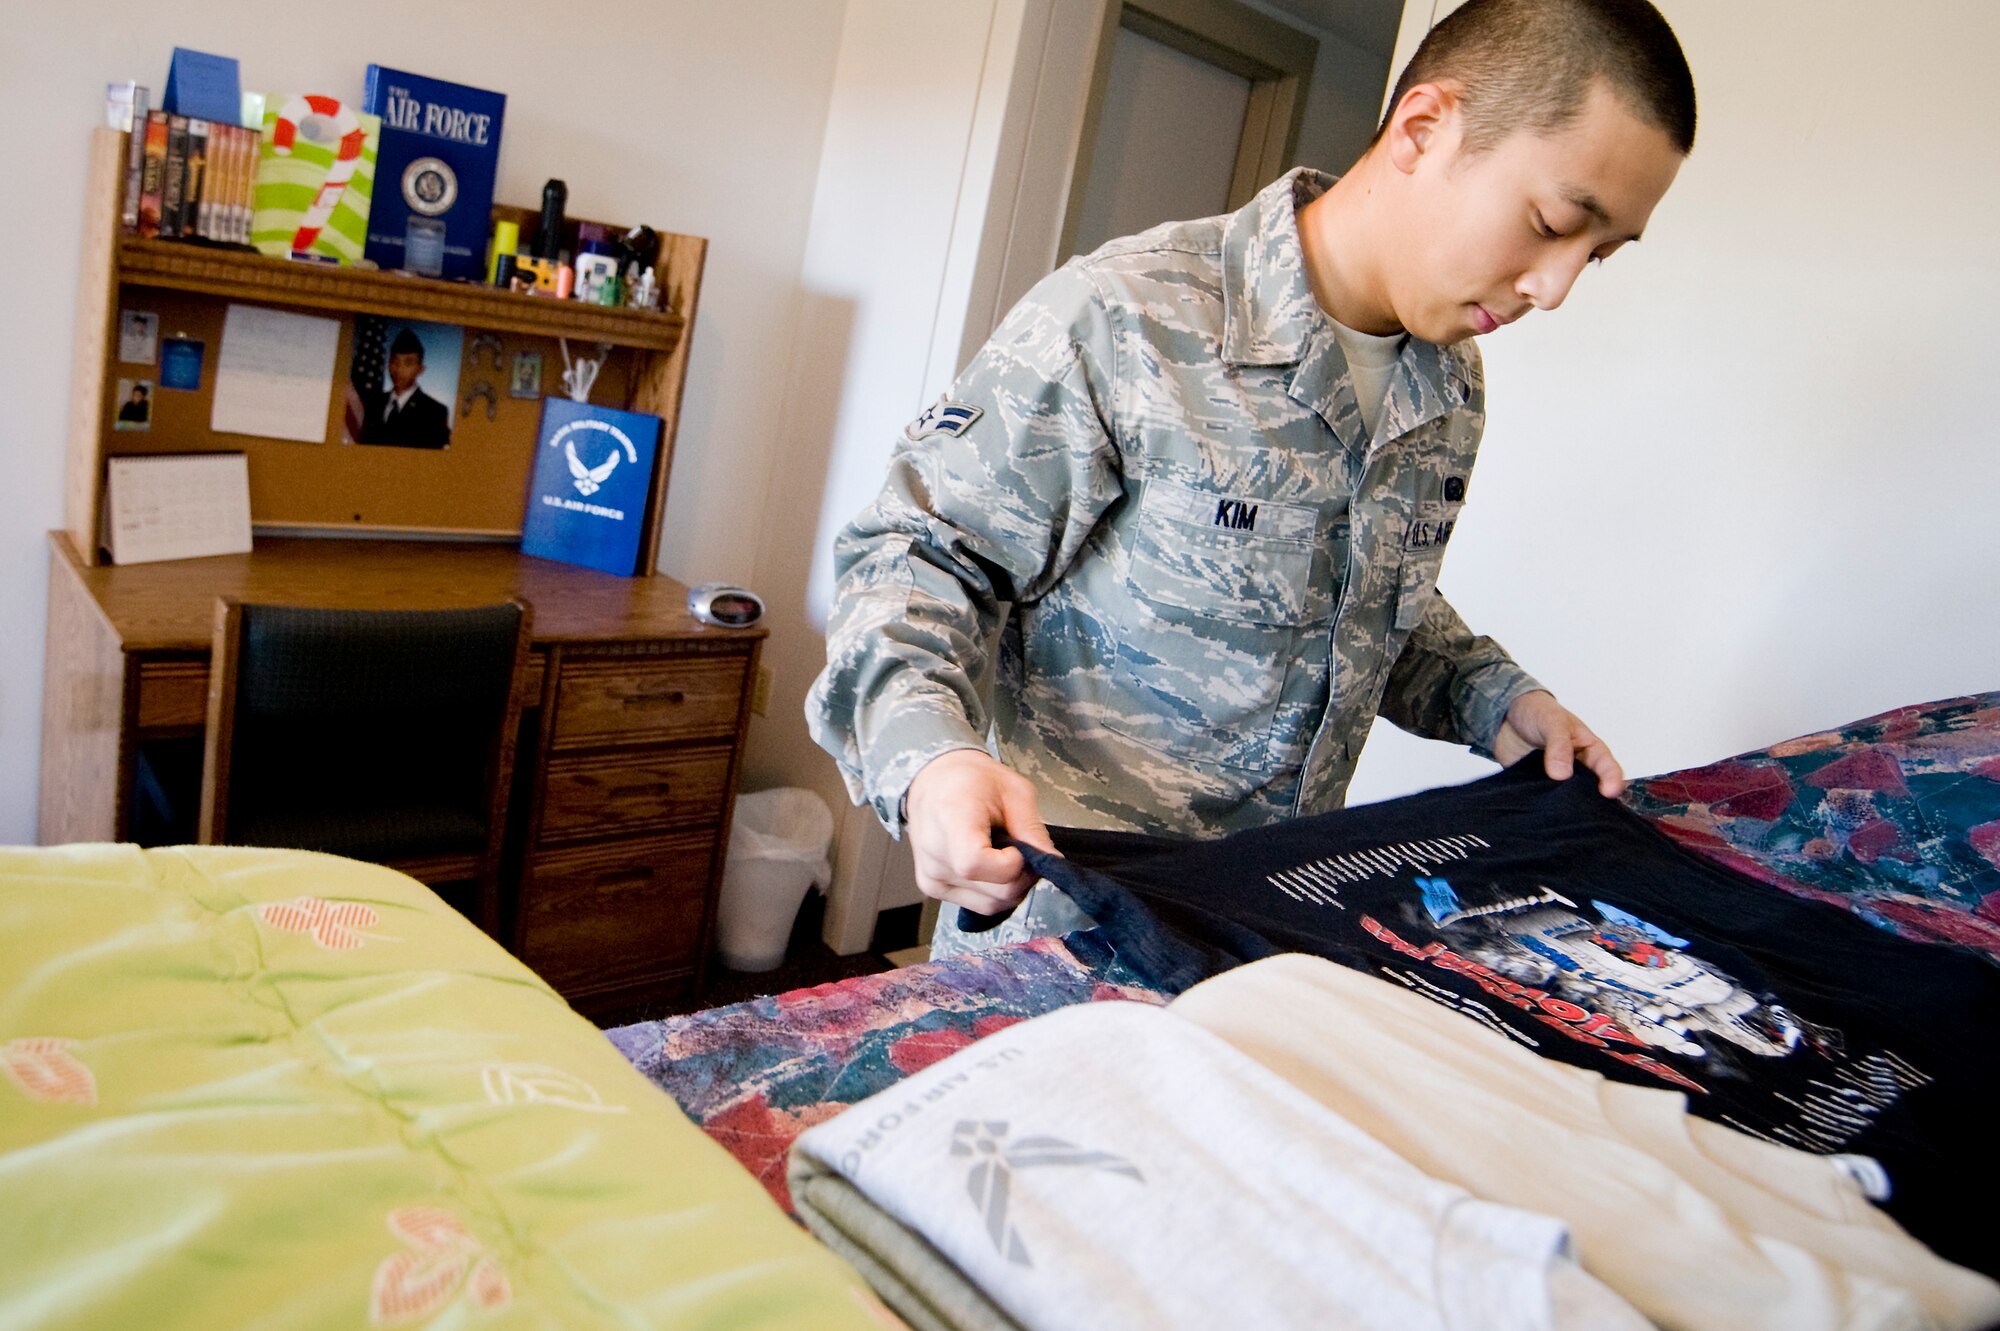 Airman 1st Class Daniel Kim, 62nd Force Support Squadron, folds his laundry in preparation for a dorm inspection. Airman Kim was recently presented a coin after a wing inspector was amazed with how clean he kept his room. (U.S. Air Force photo/Abner Guzman)